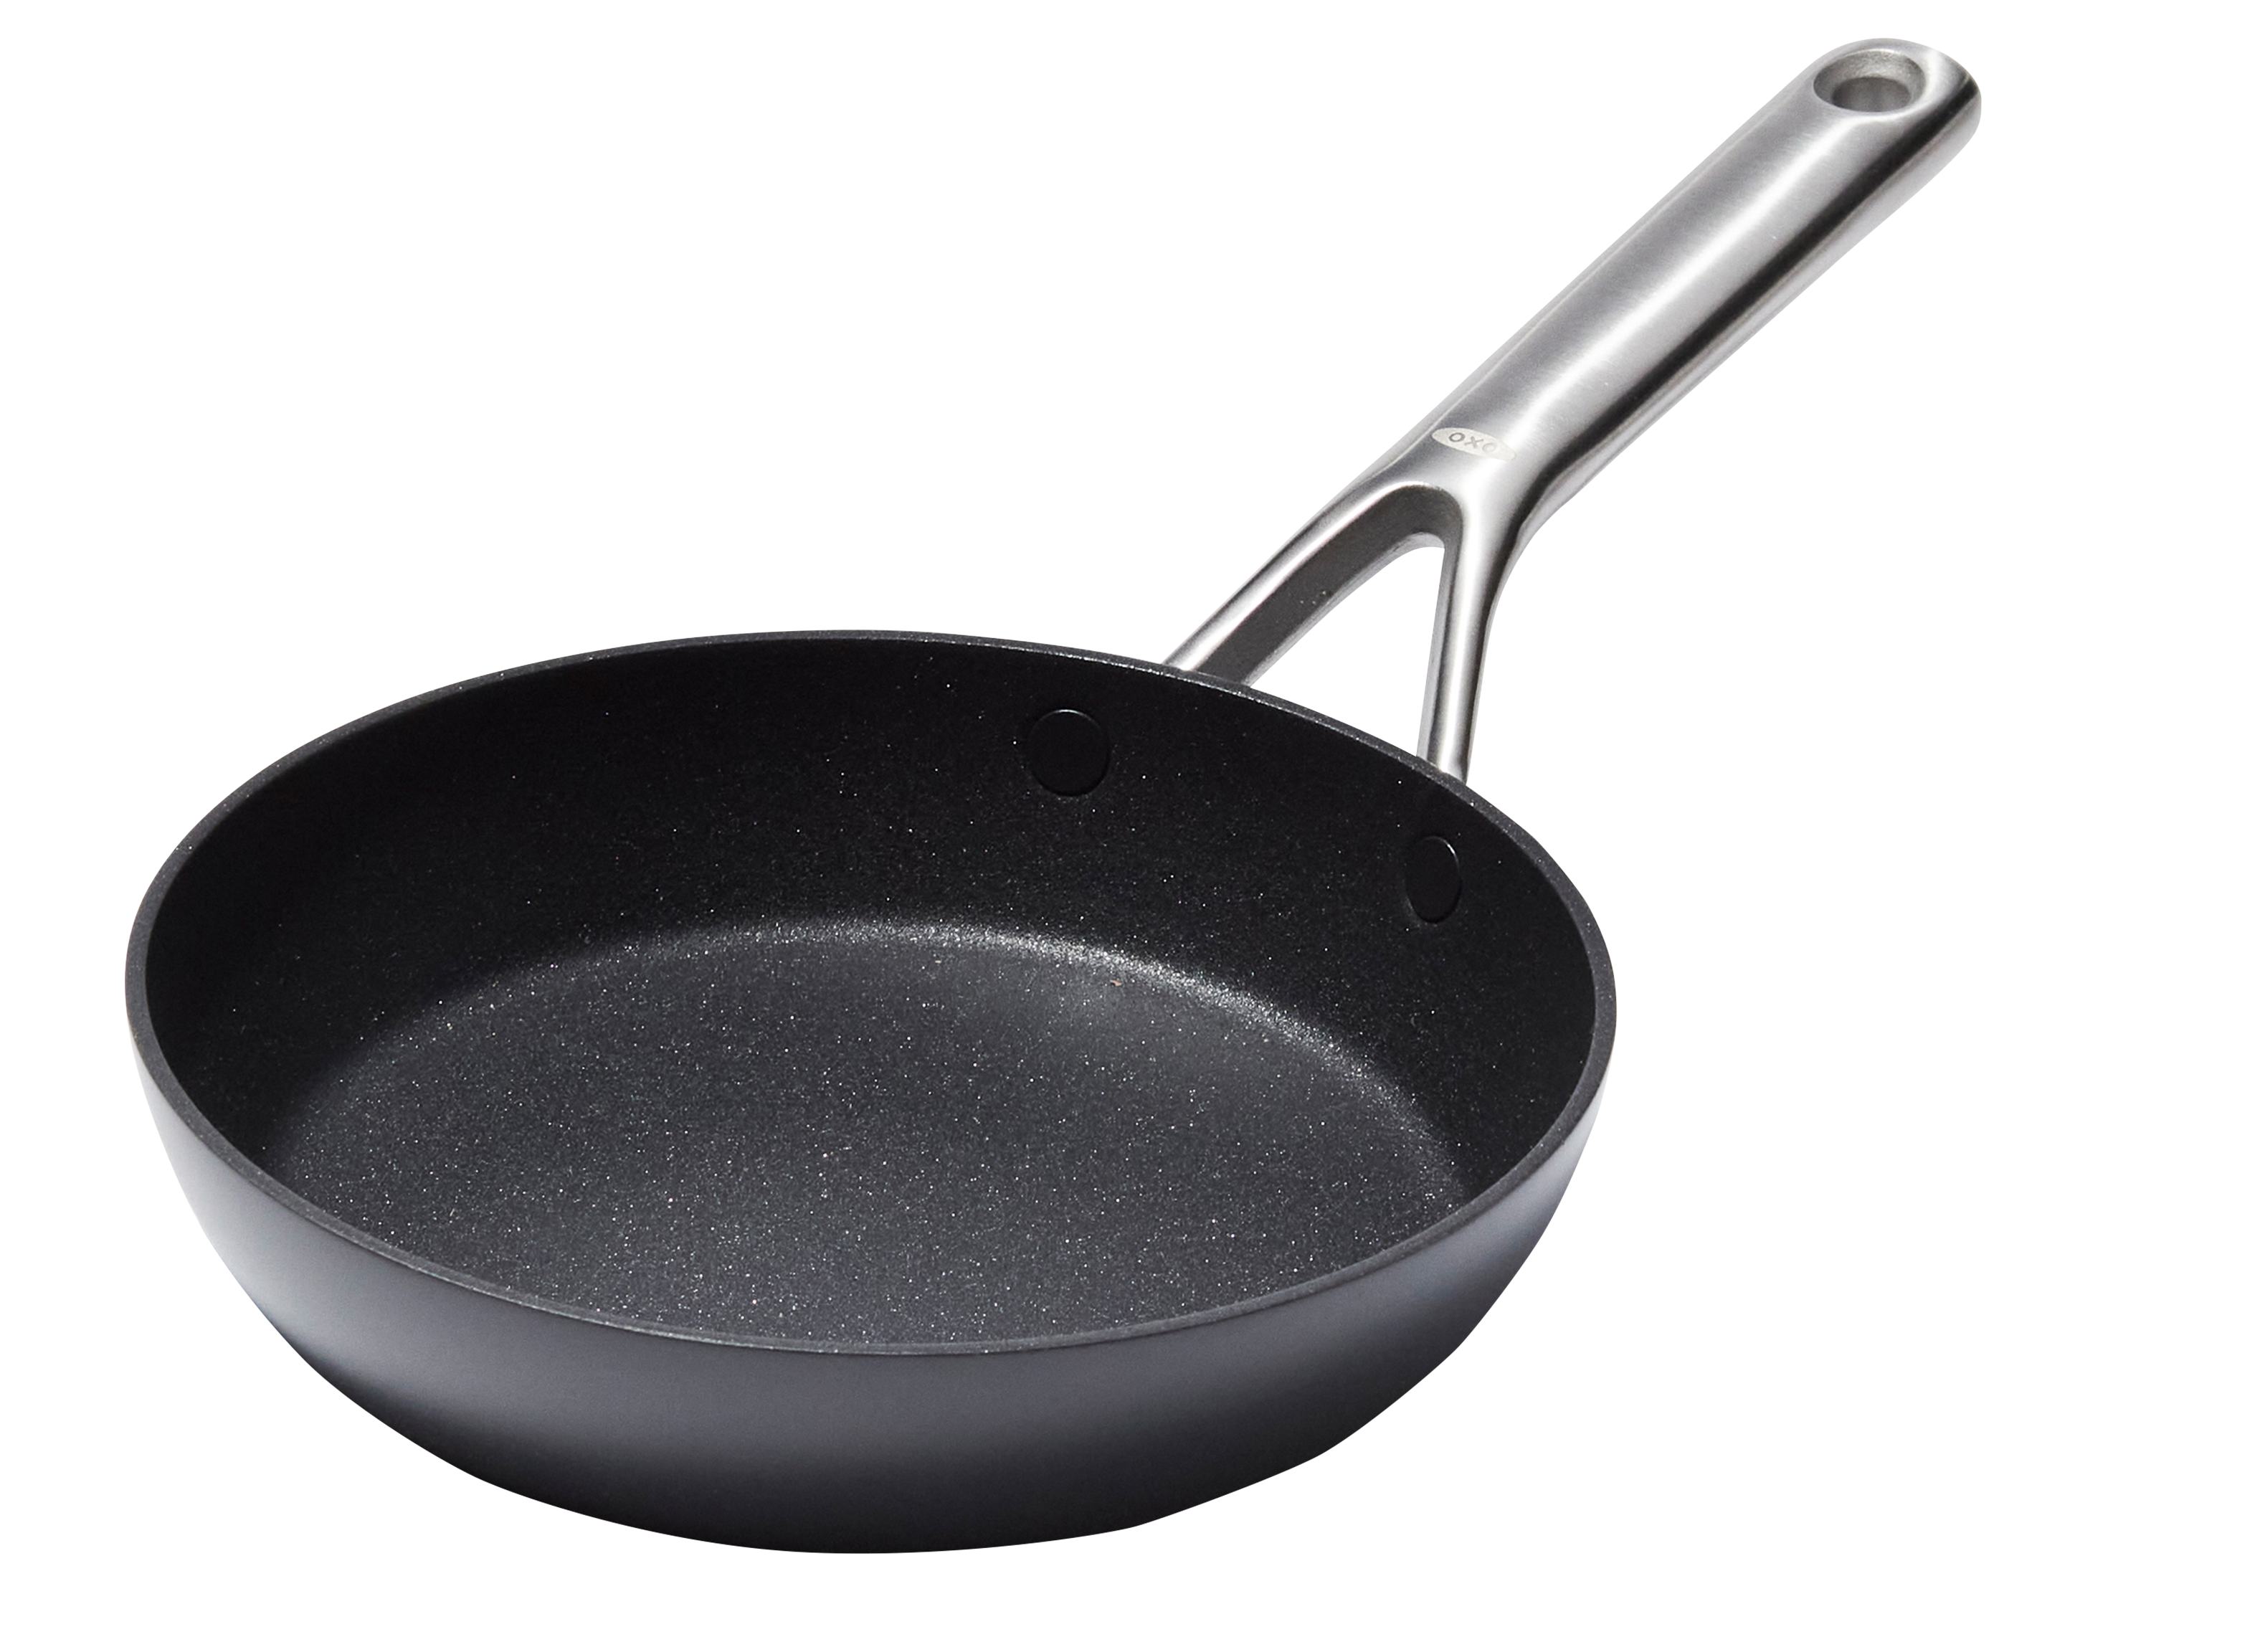 https://crdms.images.consumerreports.org/prod/products/cr/models/407525-frying-pans-nonstick-oxo-ceramic-professional-non-stick-10031471.png